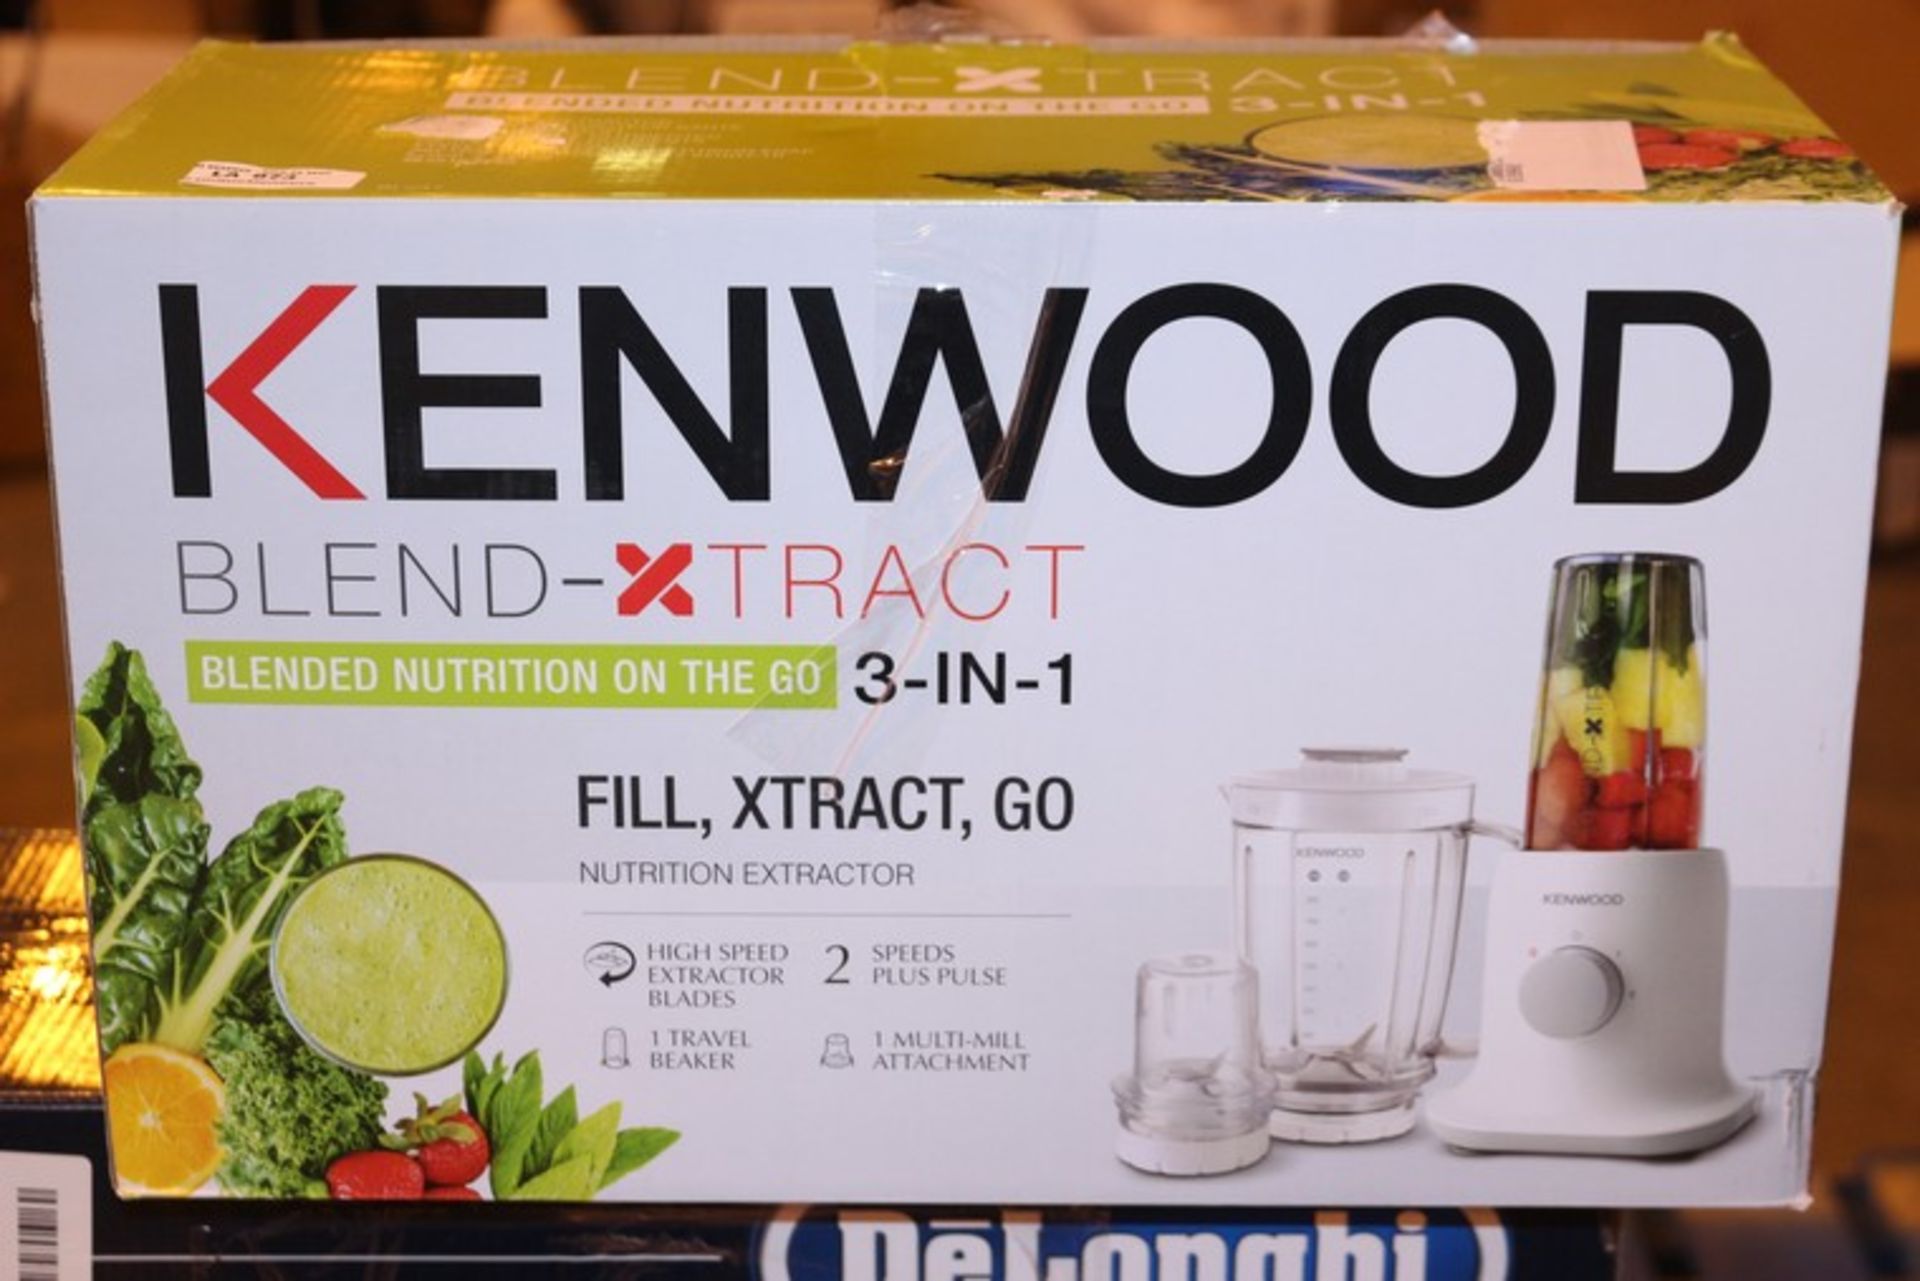 2 x BOXED KENWOOD BLEND EXTRACT 3 IN 1 FILL EXTRACT AND GO SPORTS BLENDERS RRP £30 (17.2.17) *PLEASE